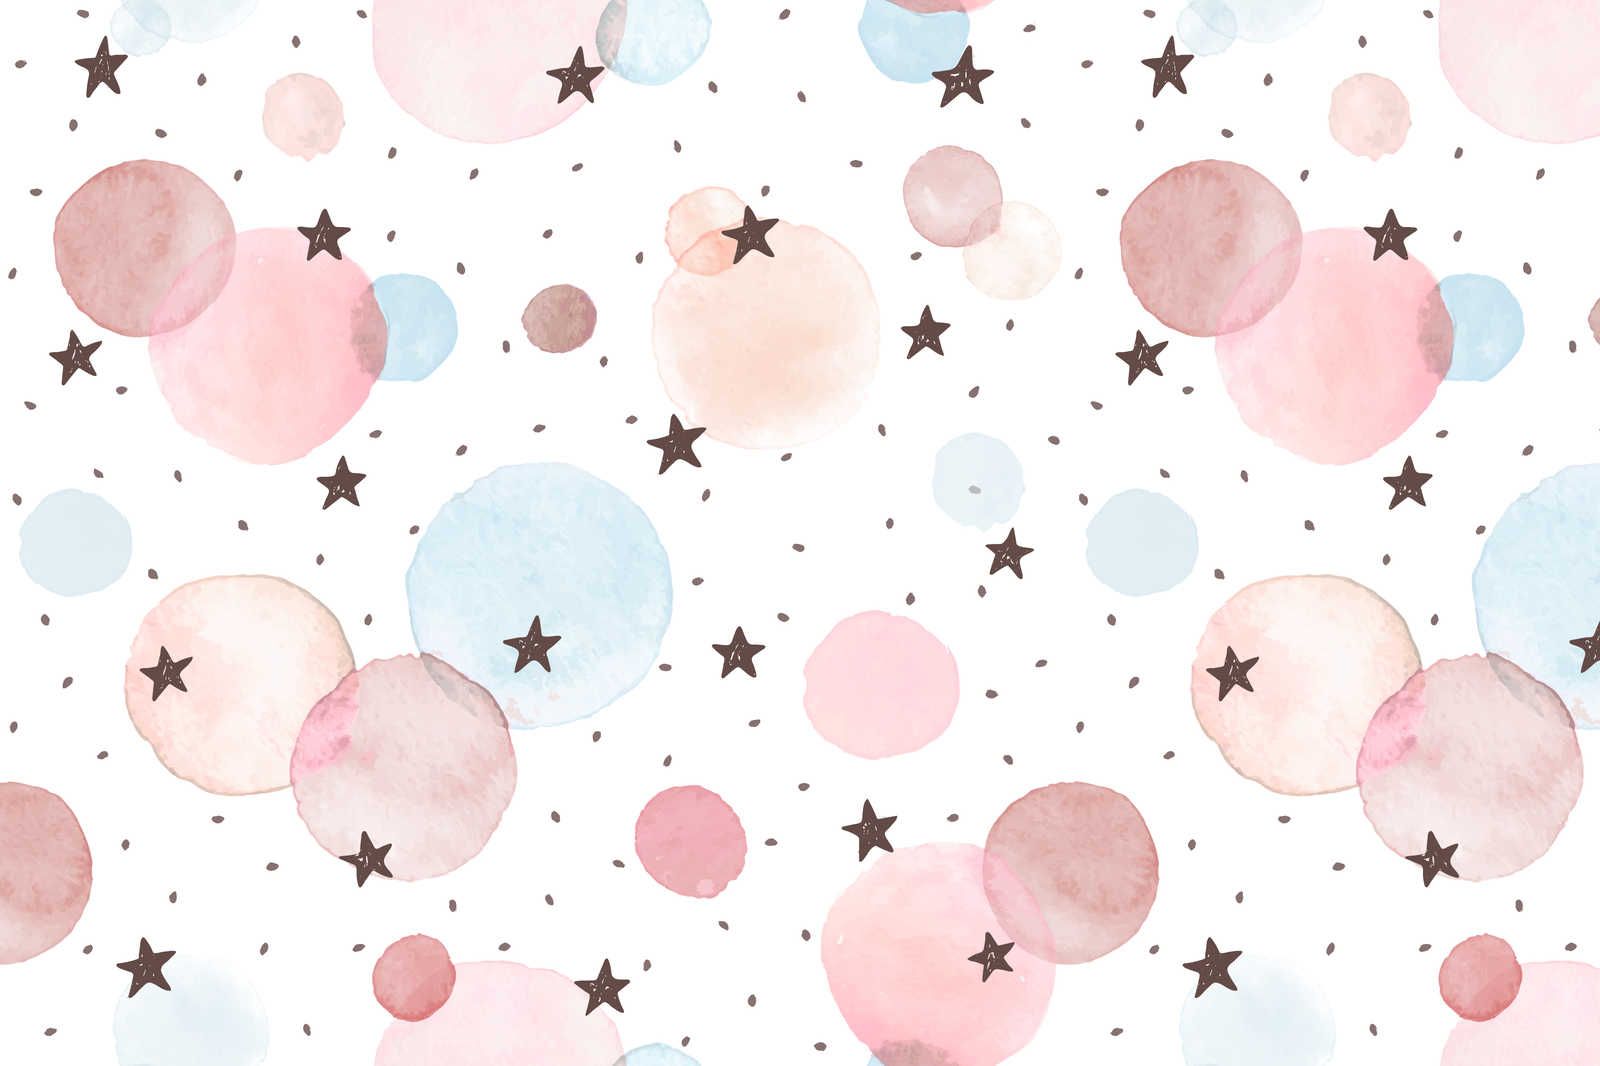             Canvas for children's room with stars, dots and circles - 90 cm x 60 cm
        